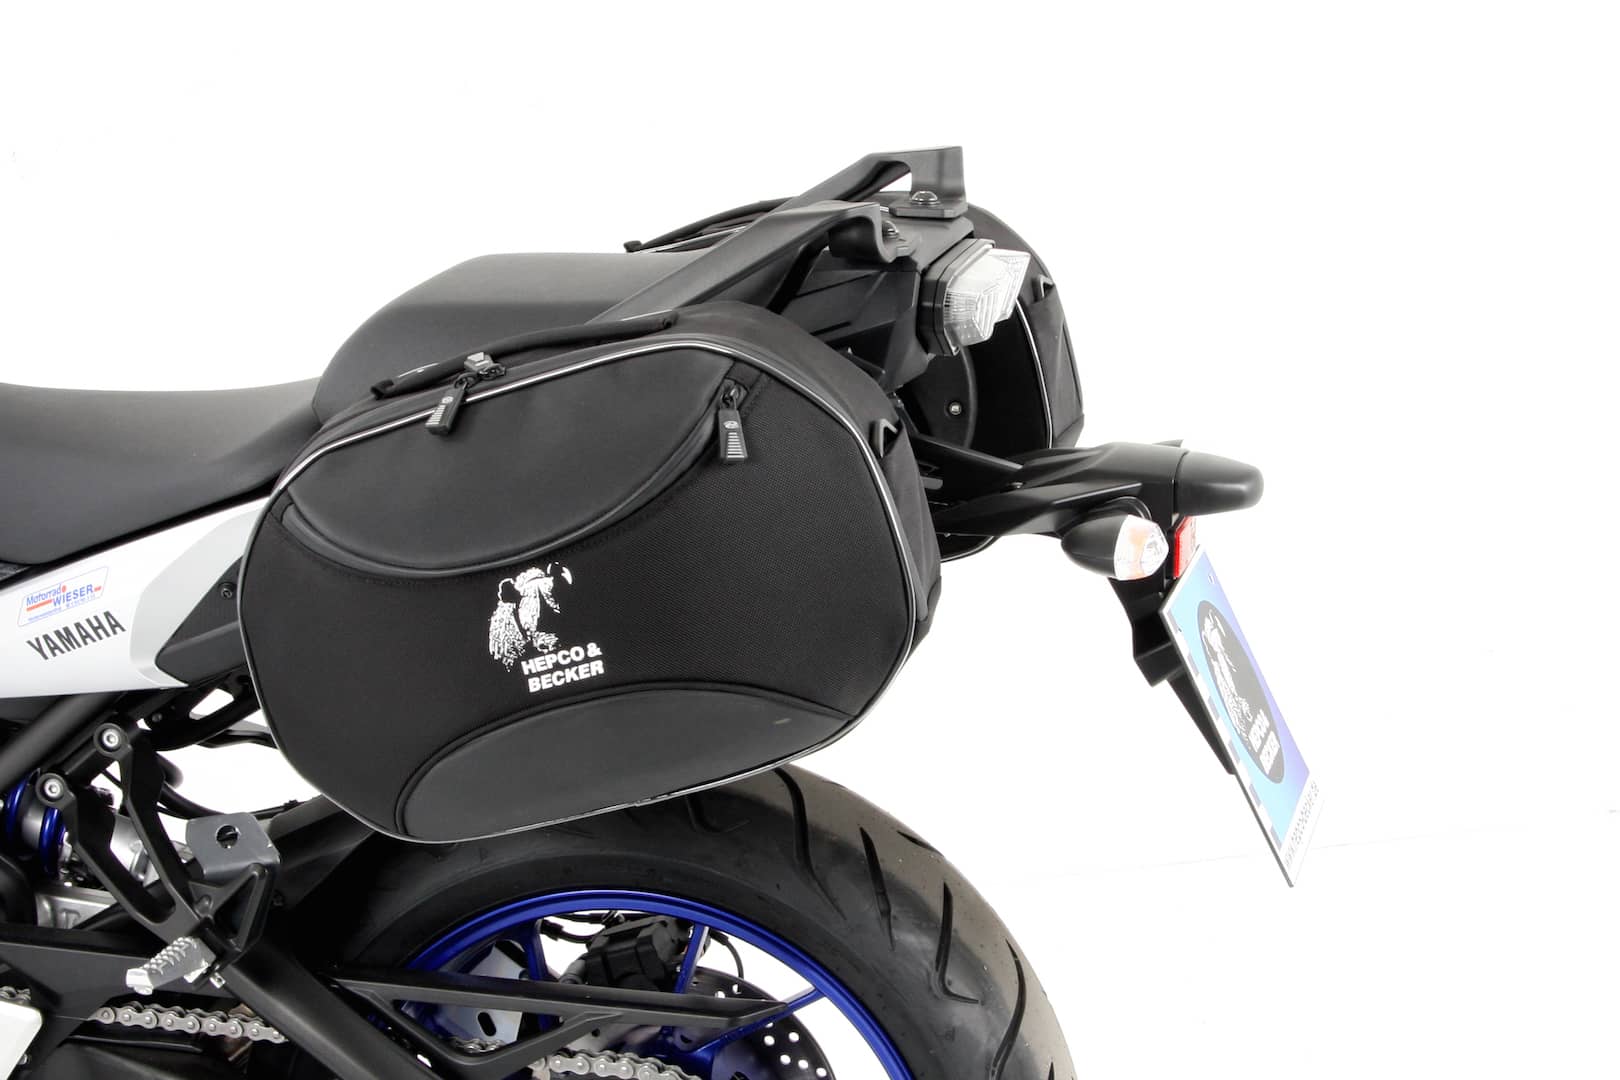 C-Bow sidecarrier for Yamaha MT-09 Tracer ABS (2015-2017)